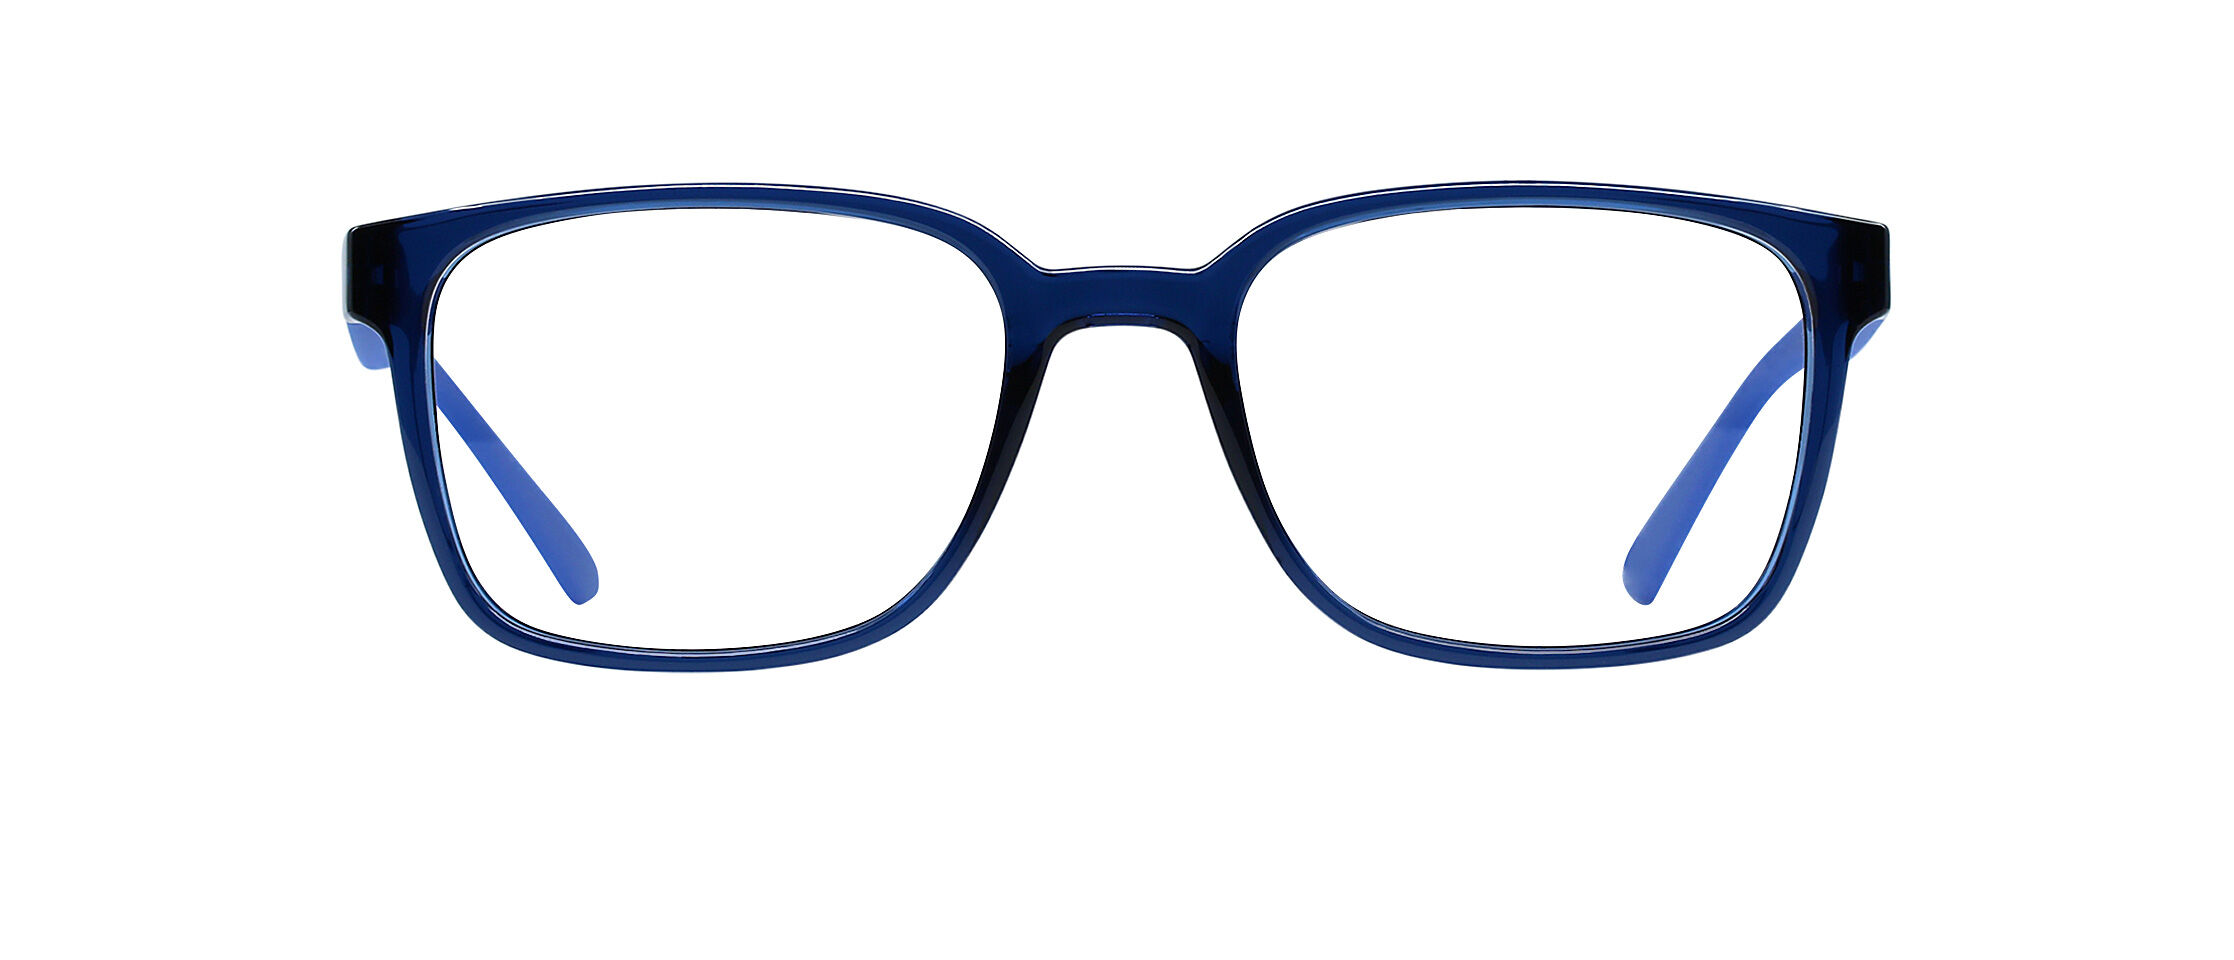 Calvin Klein CK20534 Glasses | Free Shipping and Returns | Eyeconic